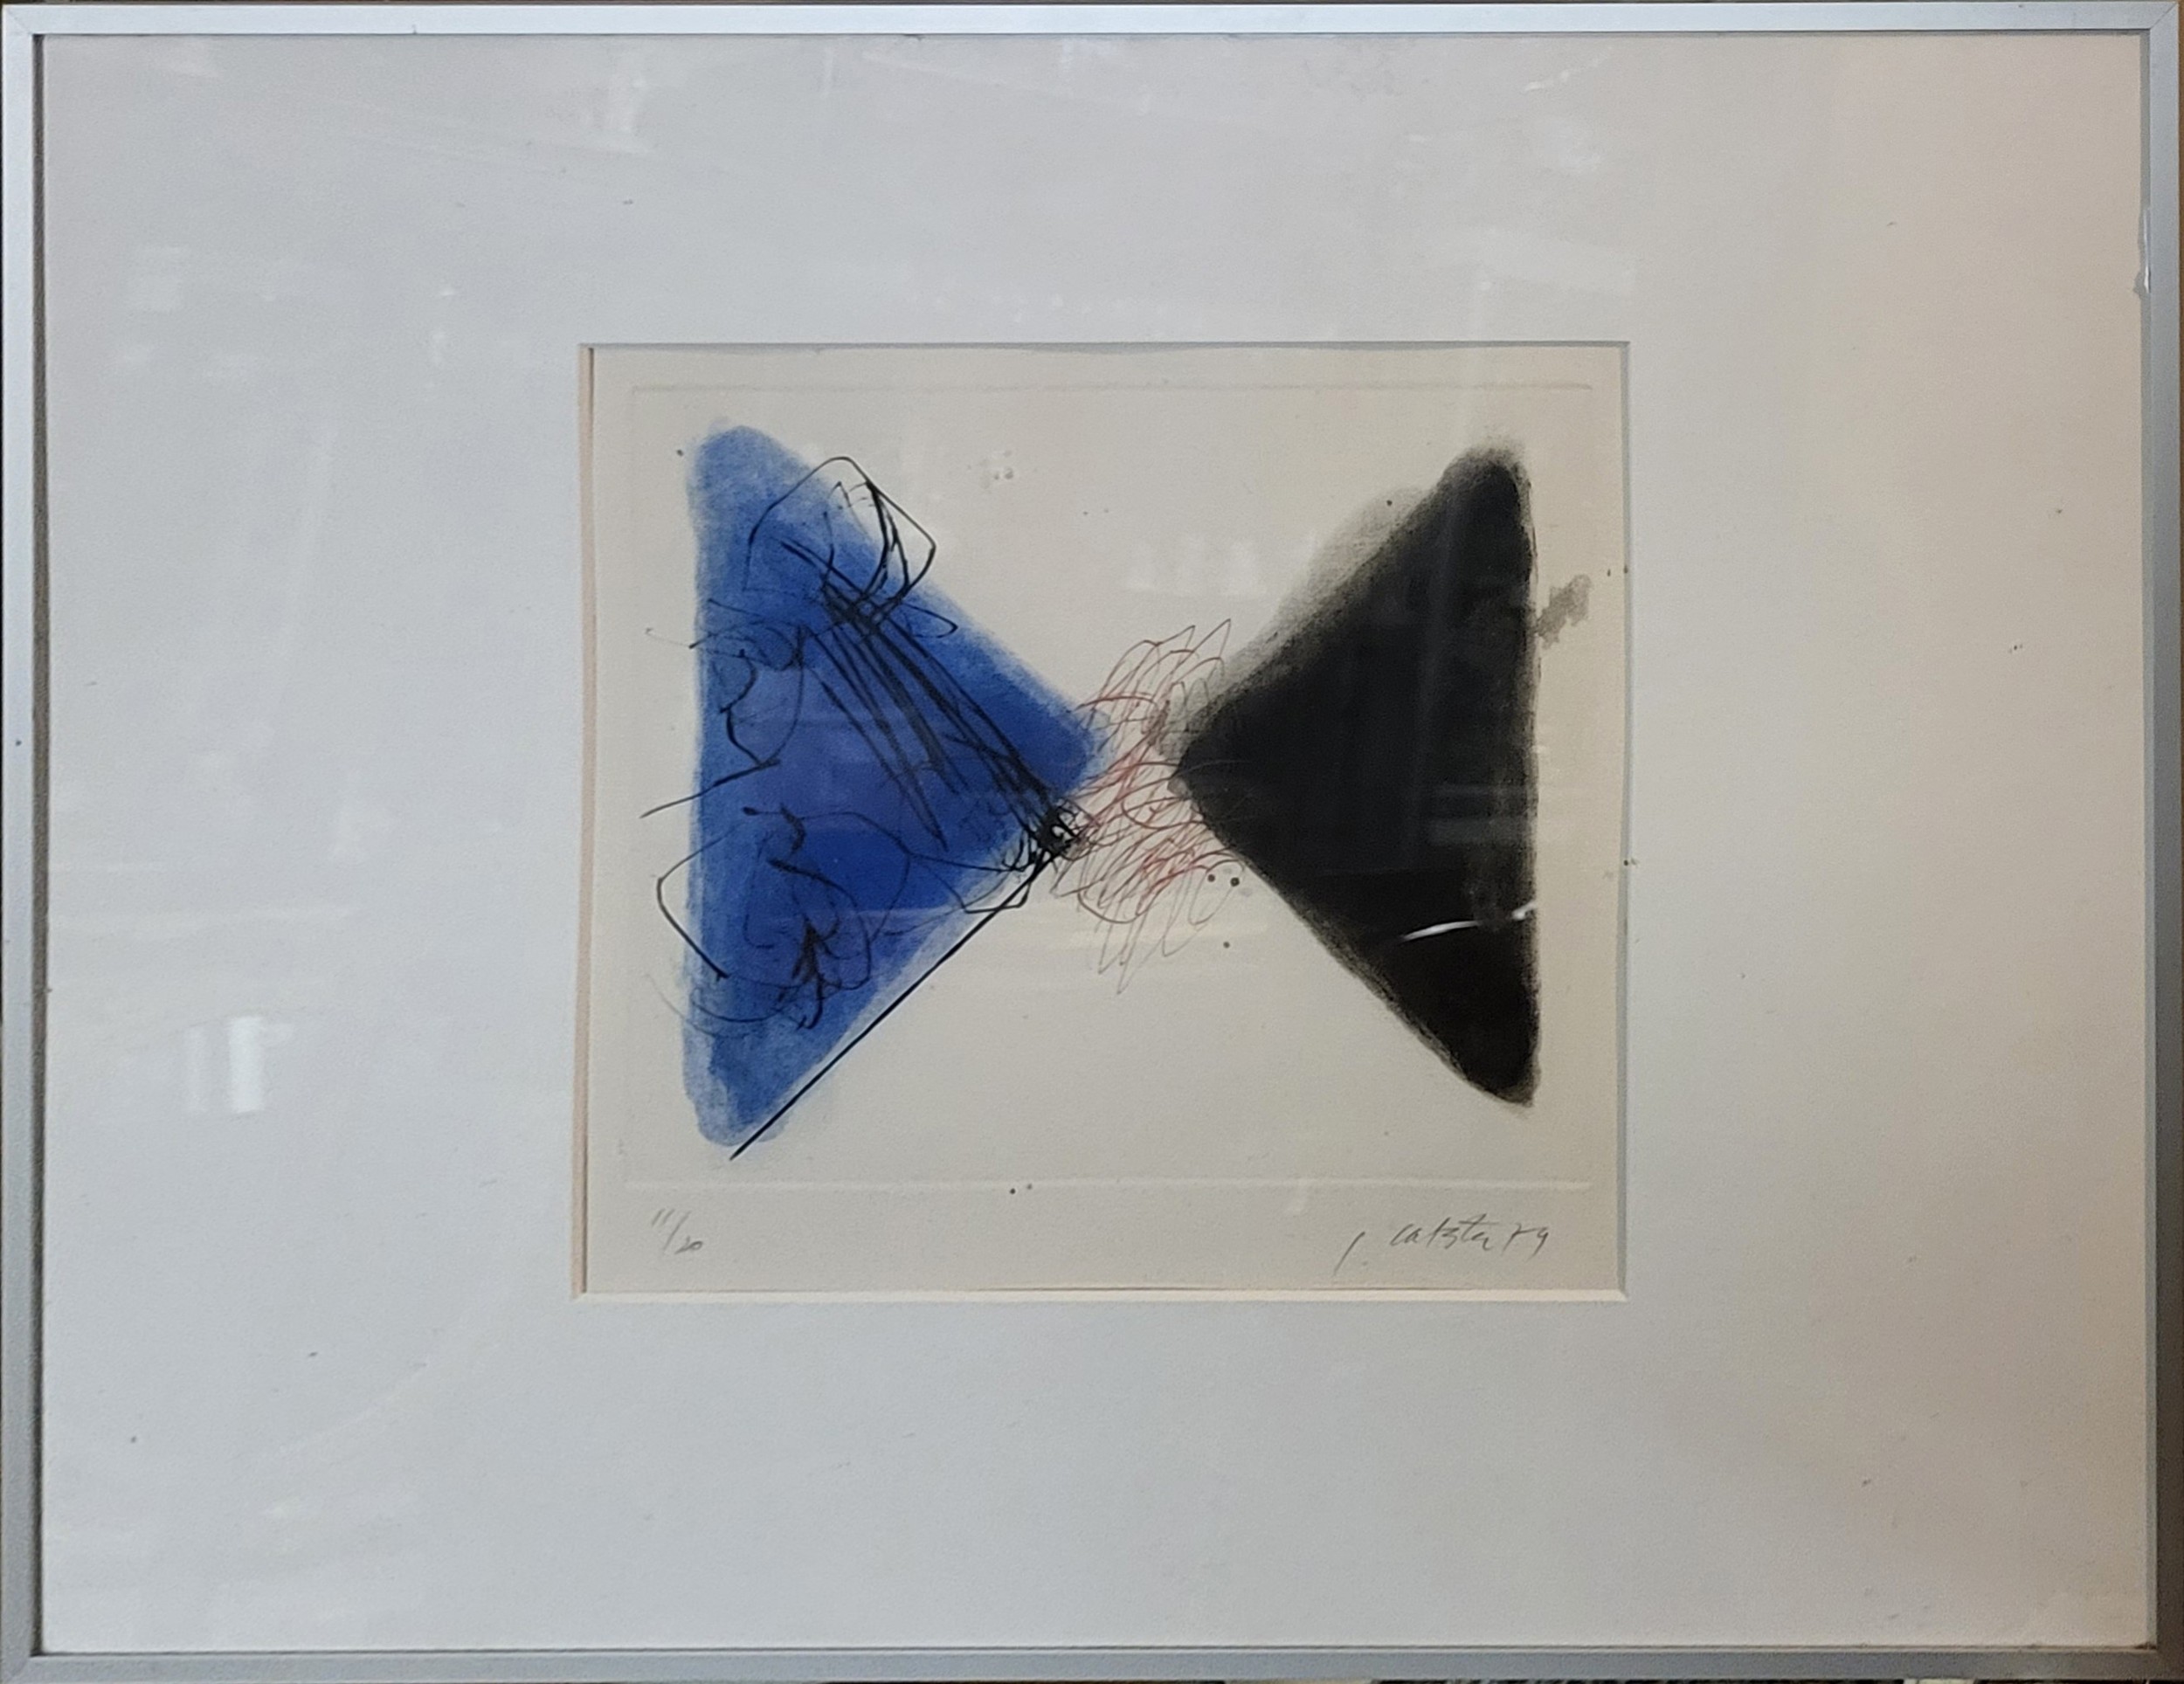 GER LASTER, DUTCH, 1920 - 2012, A LIMITED EDITION (11/20) ABSTRACT LITHOGRAPHIC GEOMETRIC STUDY WITH - Image 2 of 3